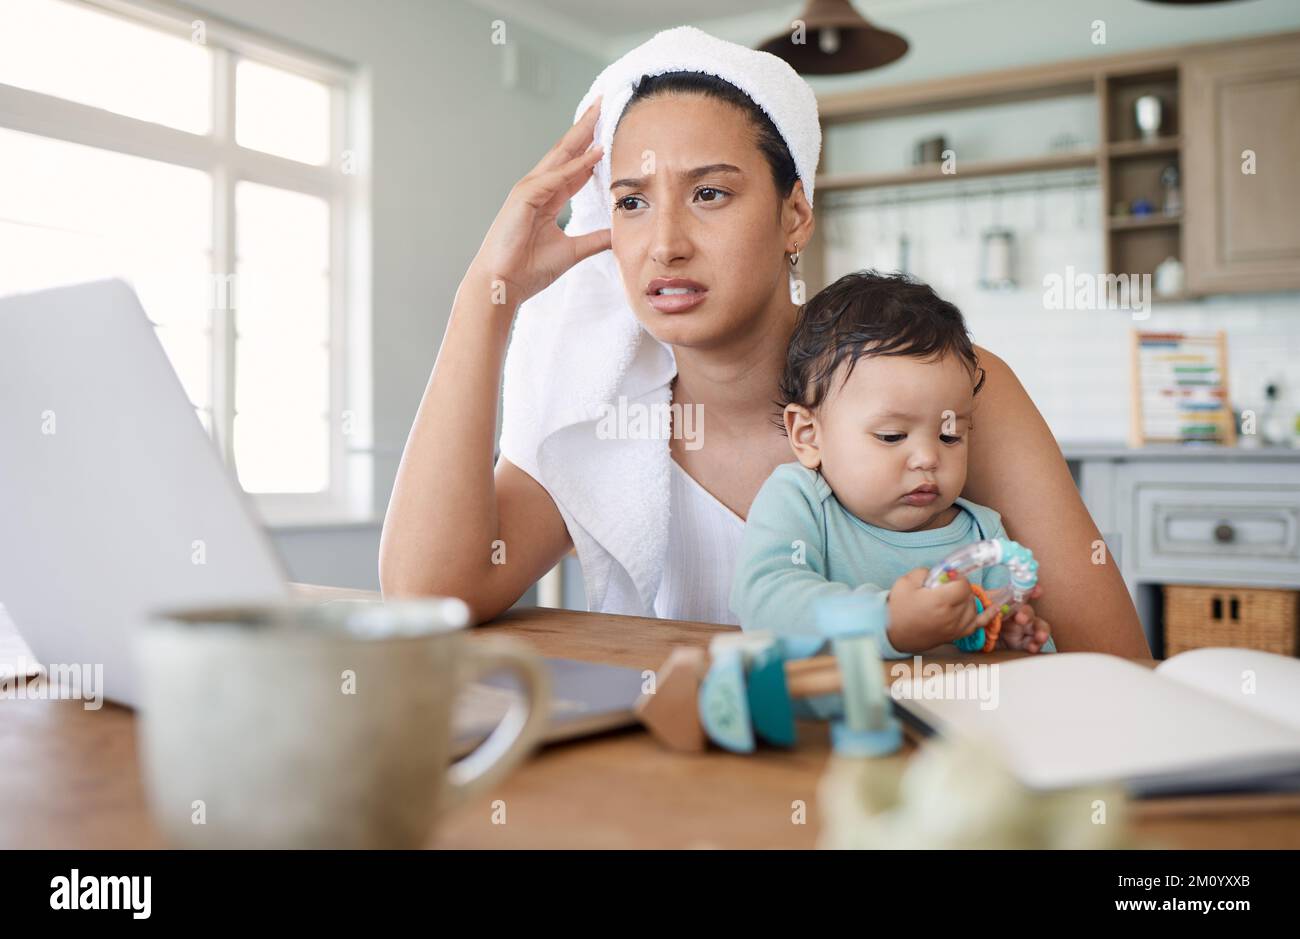 Time flies when you have a busy schedule. a woman looking stressed while looking at her laptop and holding her baby on her lap. Stock Photo